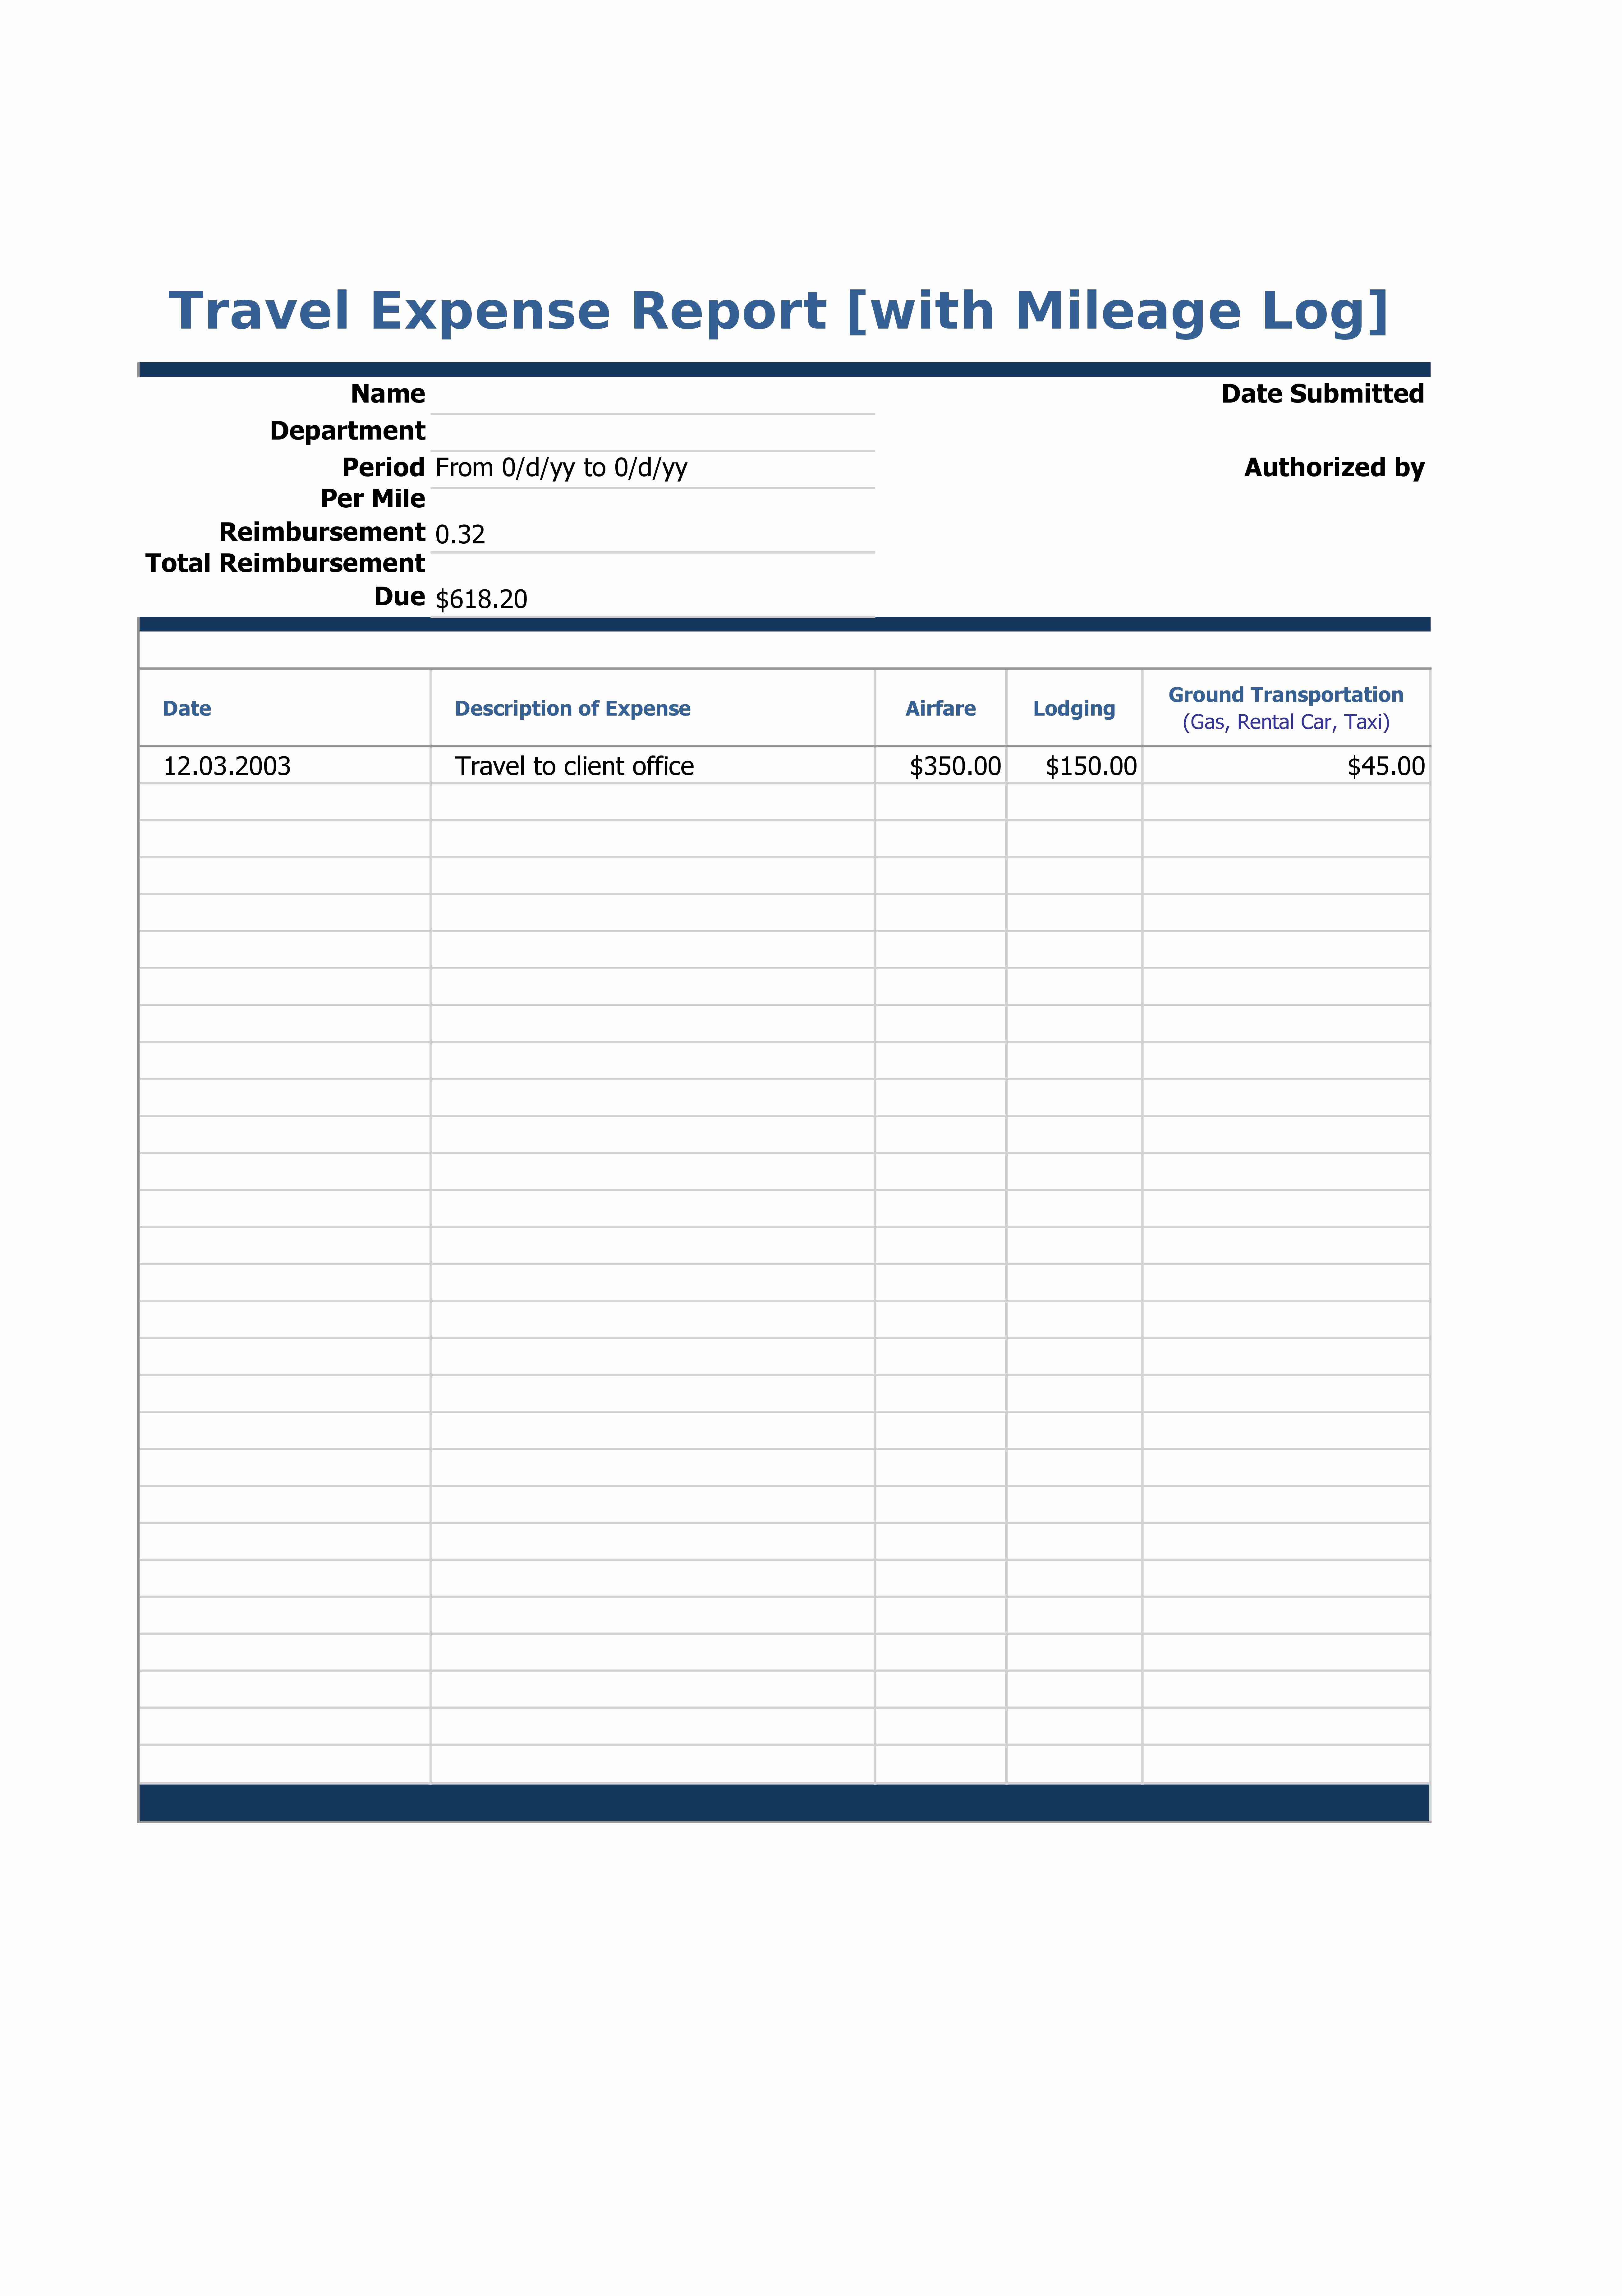 Free Expense Report Template Beautiful 40 Expense Report Templates to Help You Save Money